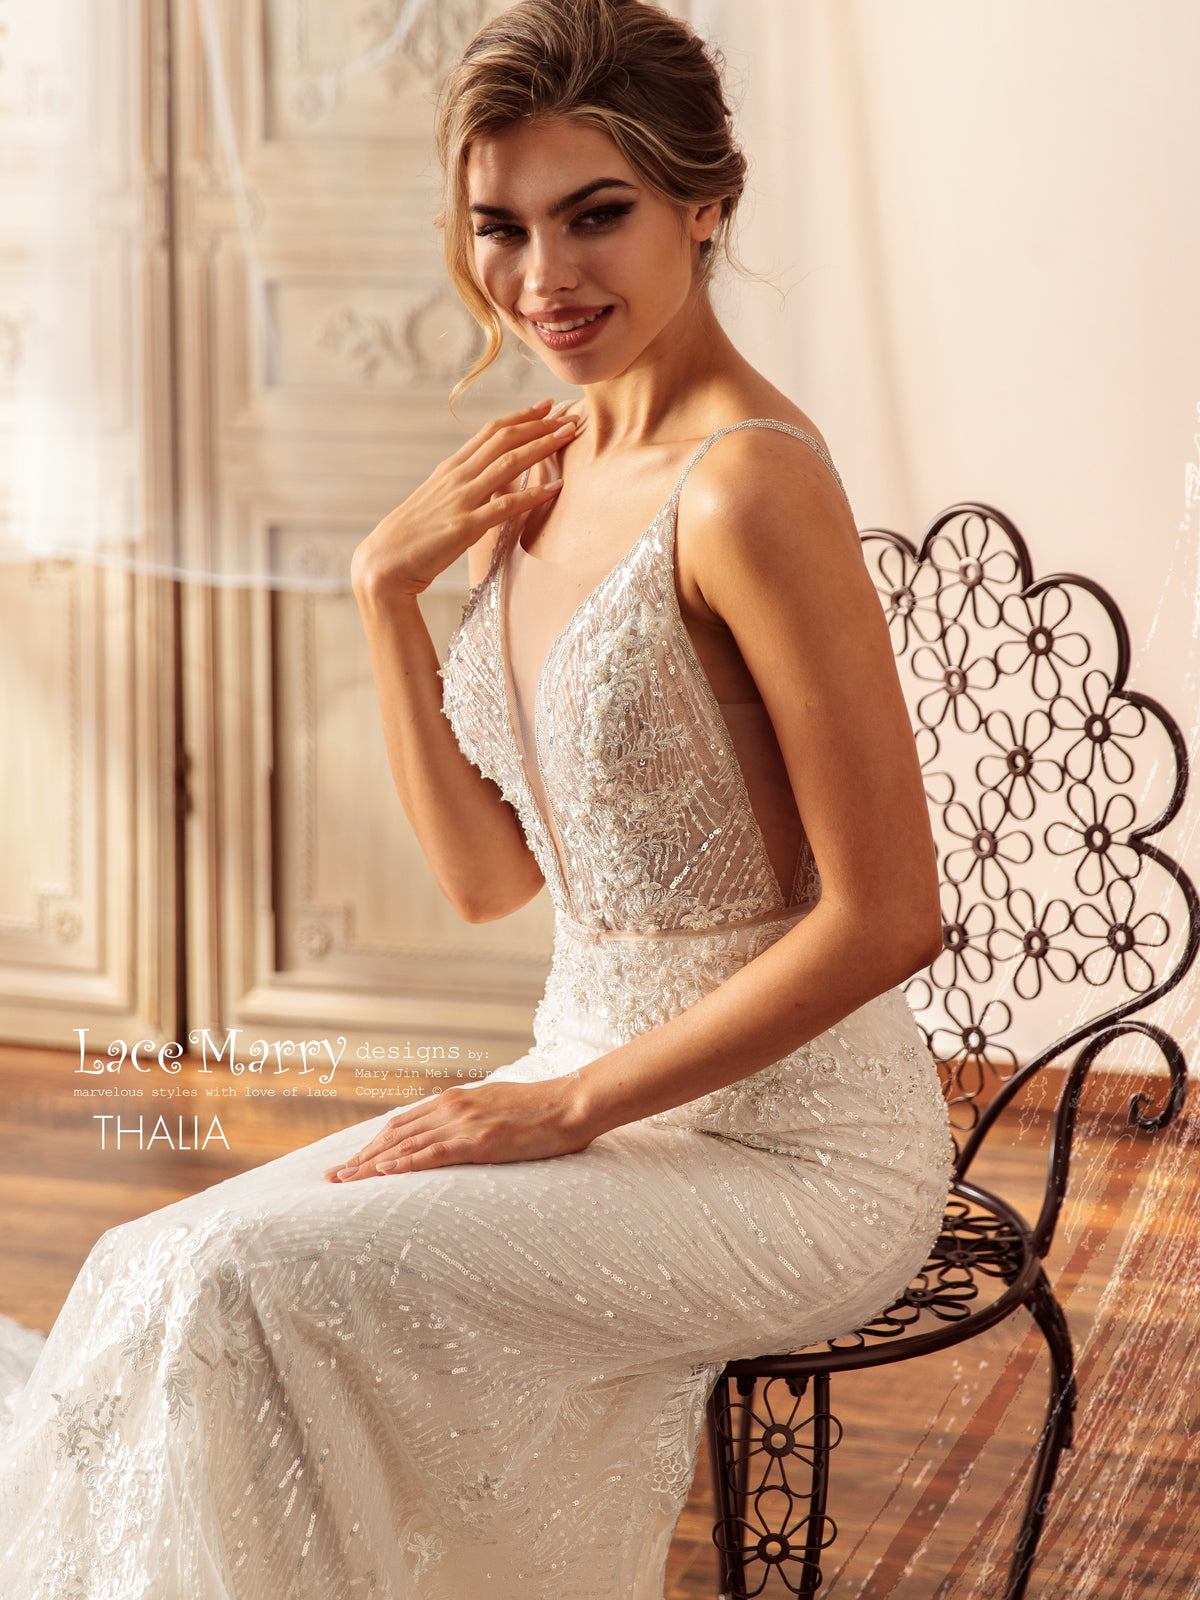 THALIA / Fitted Sparkling Wedding Dress with Deep Plunge